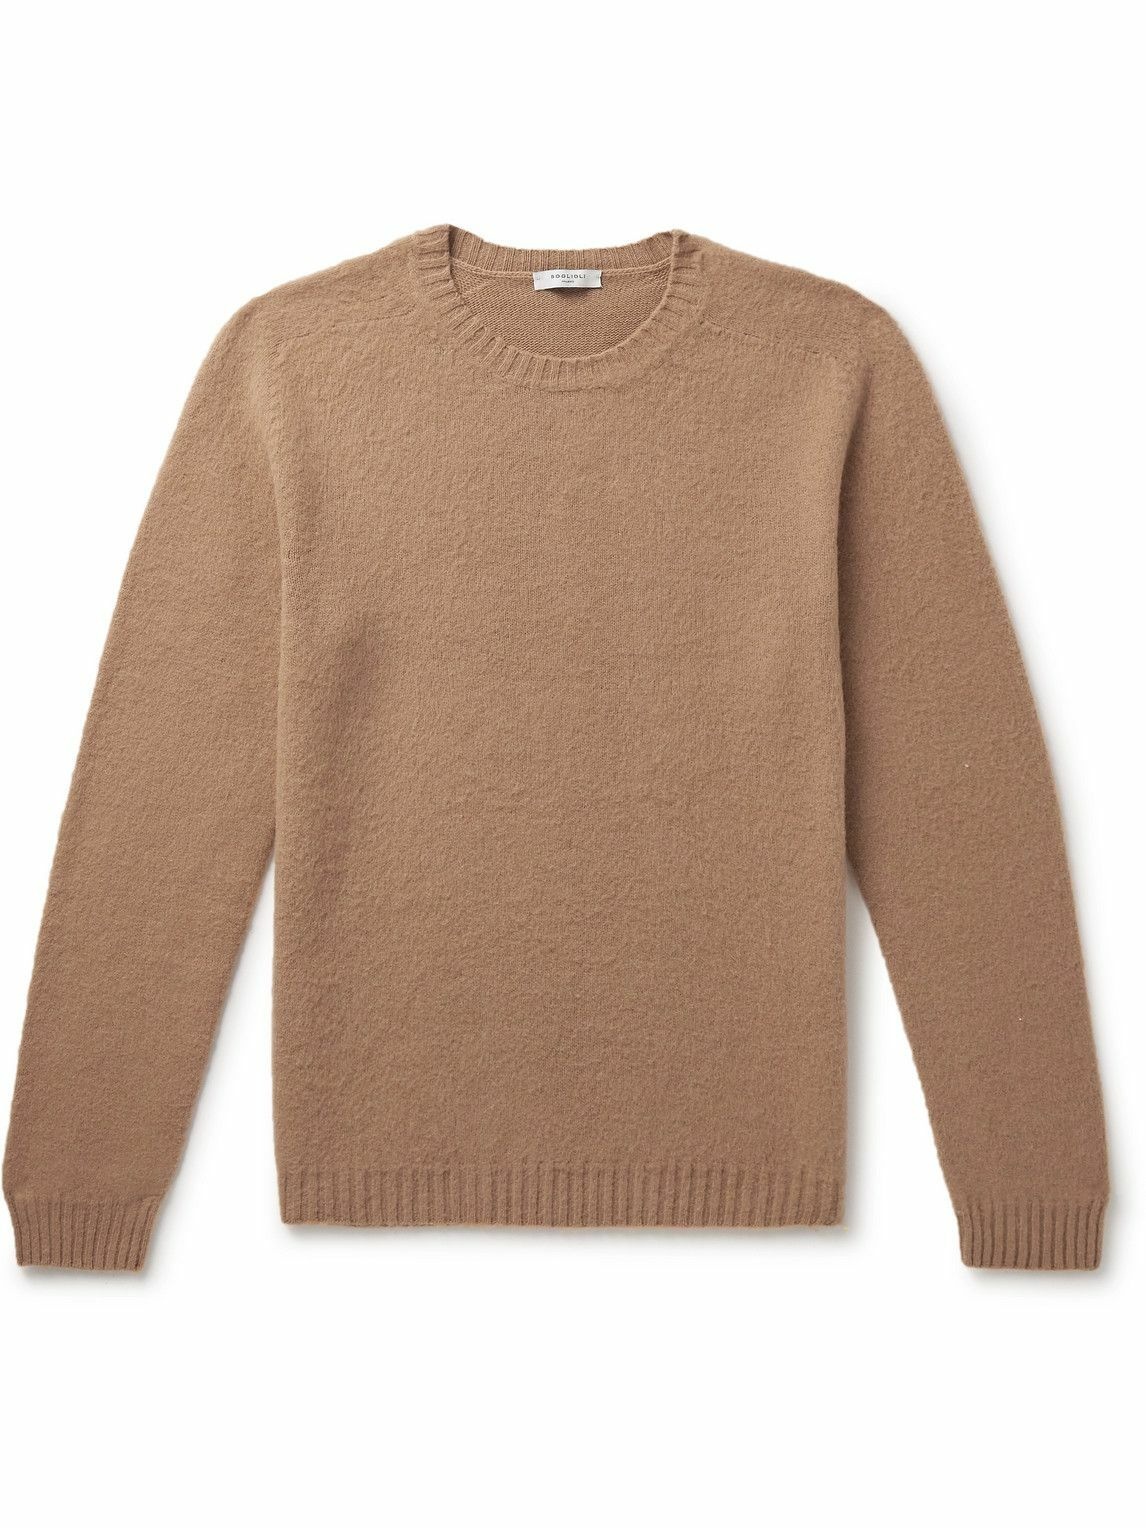 Photo: Boglioli - Slim-Fit Brushed Wool and Cashmere-Blend Sweater - Brown